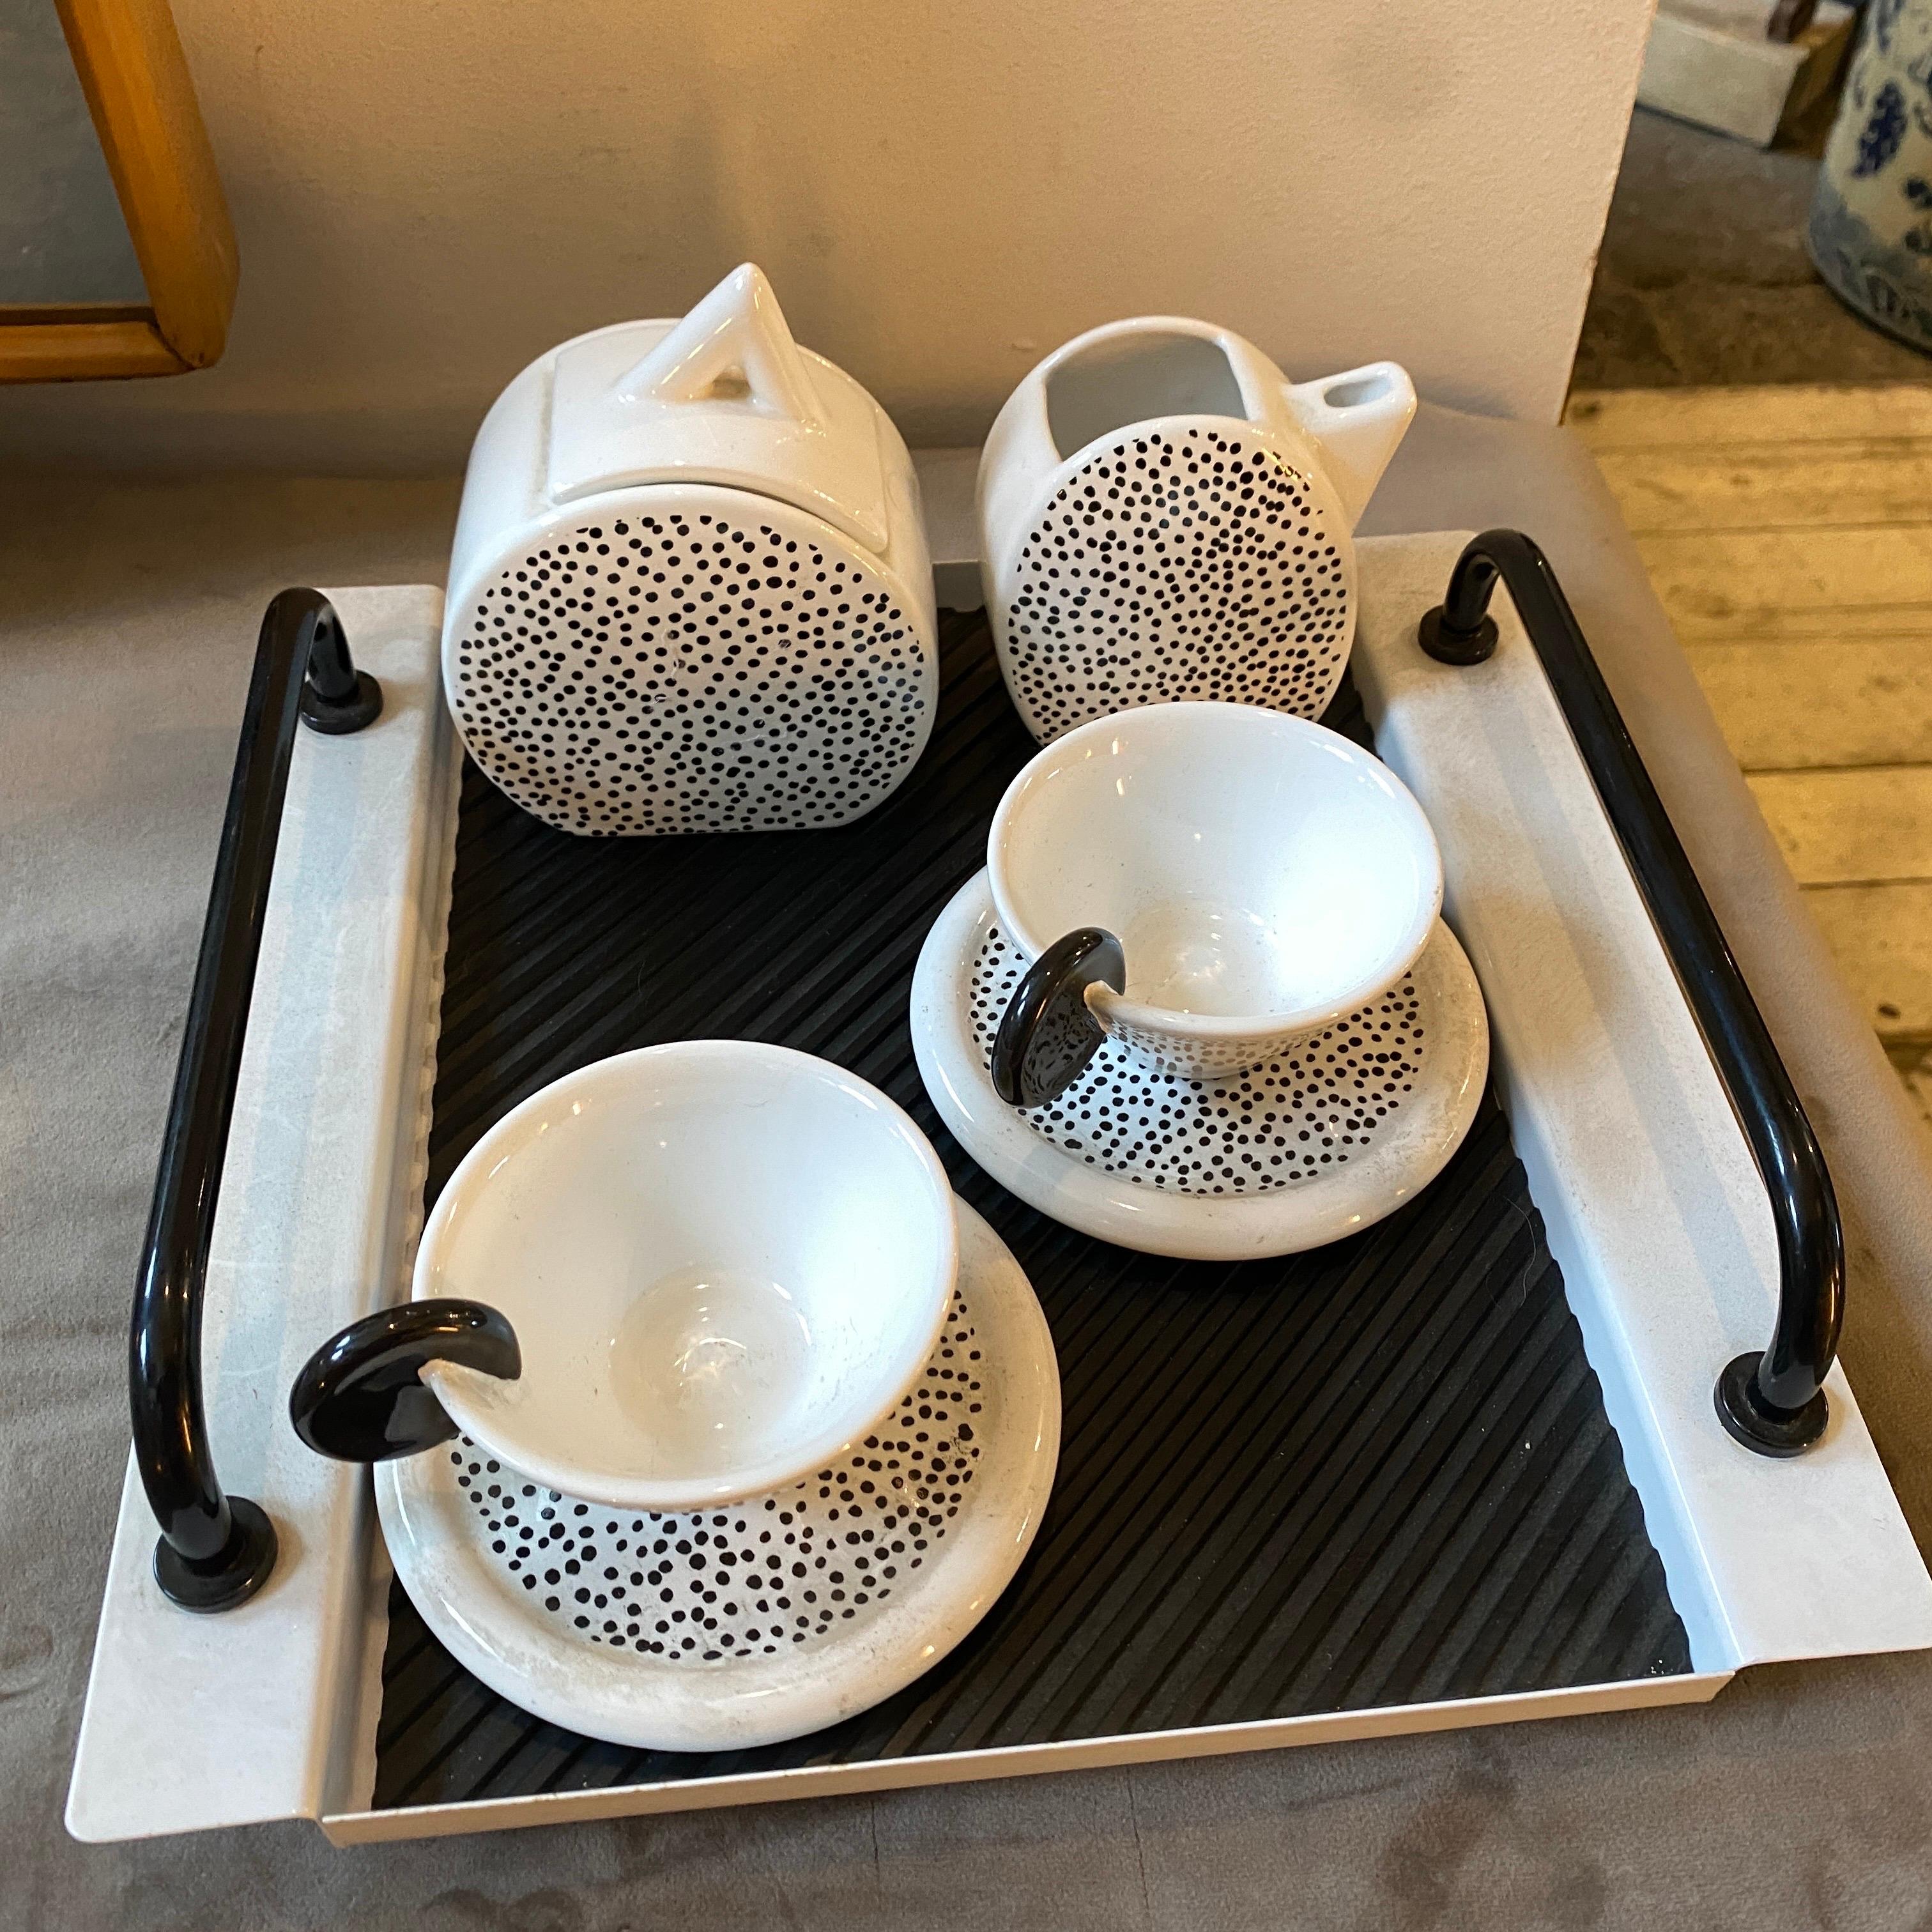 A Memphis Milano  tea set designed and manufactured in Italy in the Eighties by MAS, it's composed by a black and white metal tray, a black and wwhite ceramic sugar bowl height 13 cm, a creamer heeight 10 cm, two coffee cup. All the 5 pieces are in